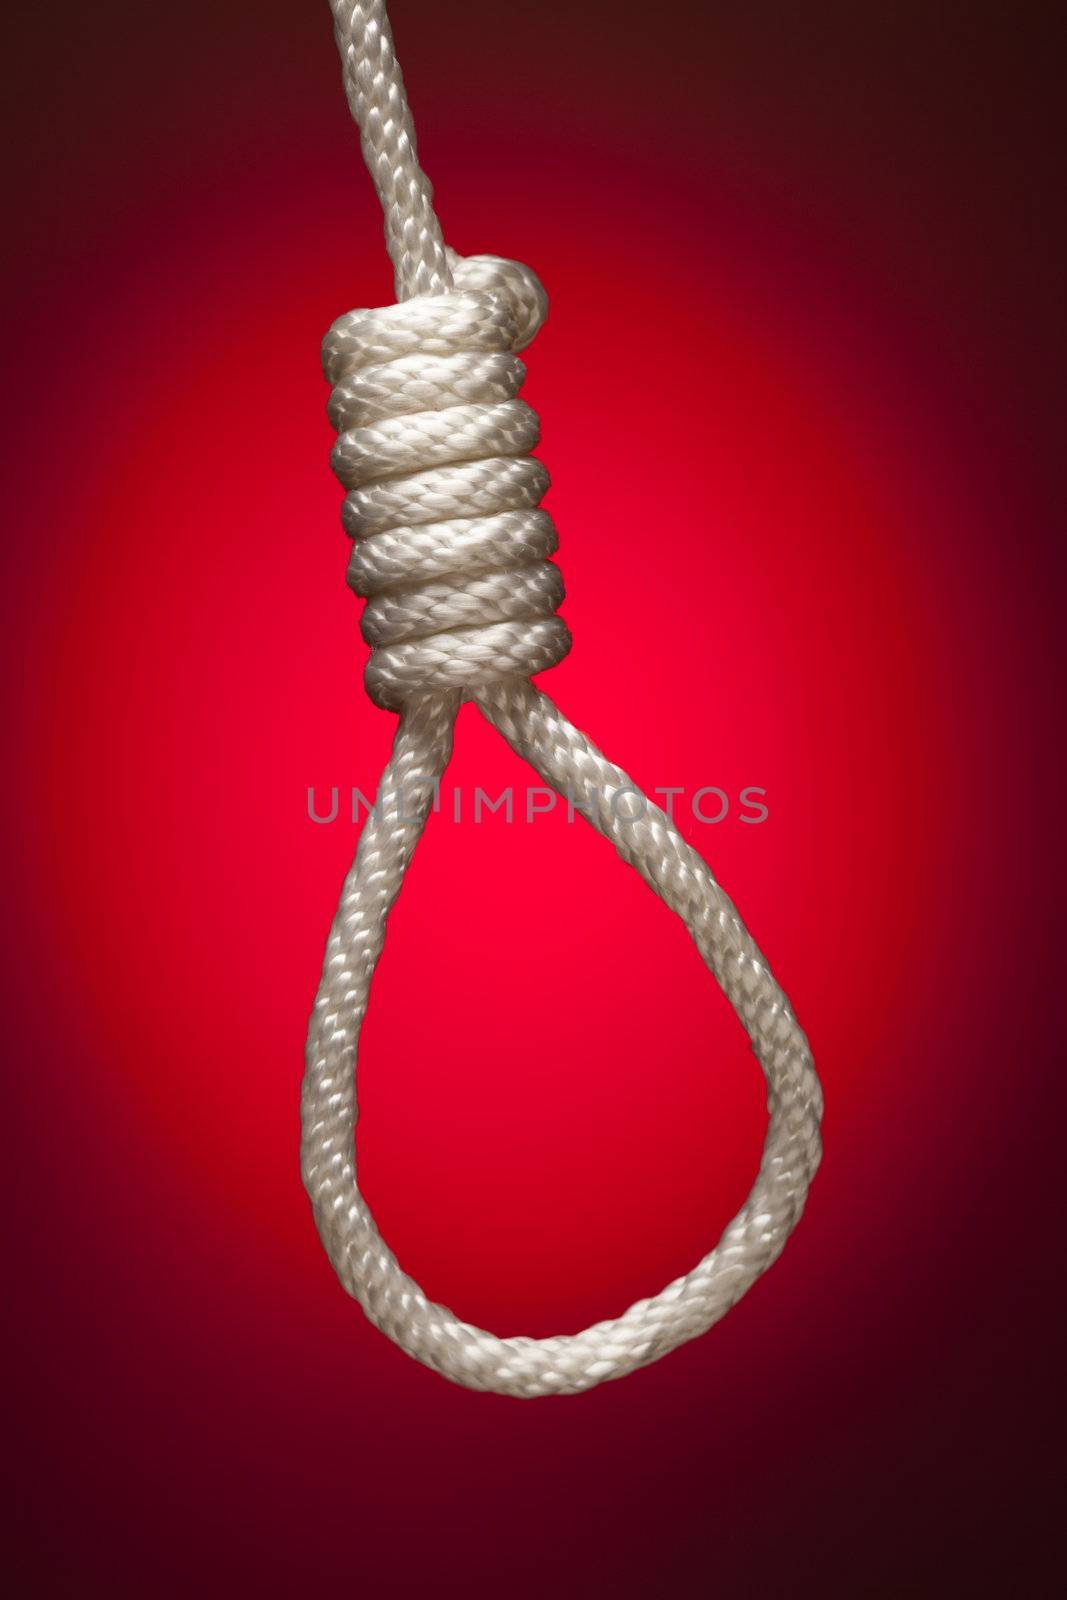 Hangman's Noose Over Red Background by Feverpitched